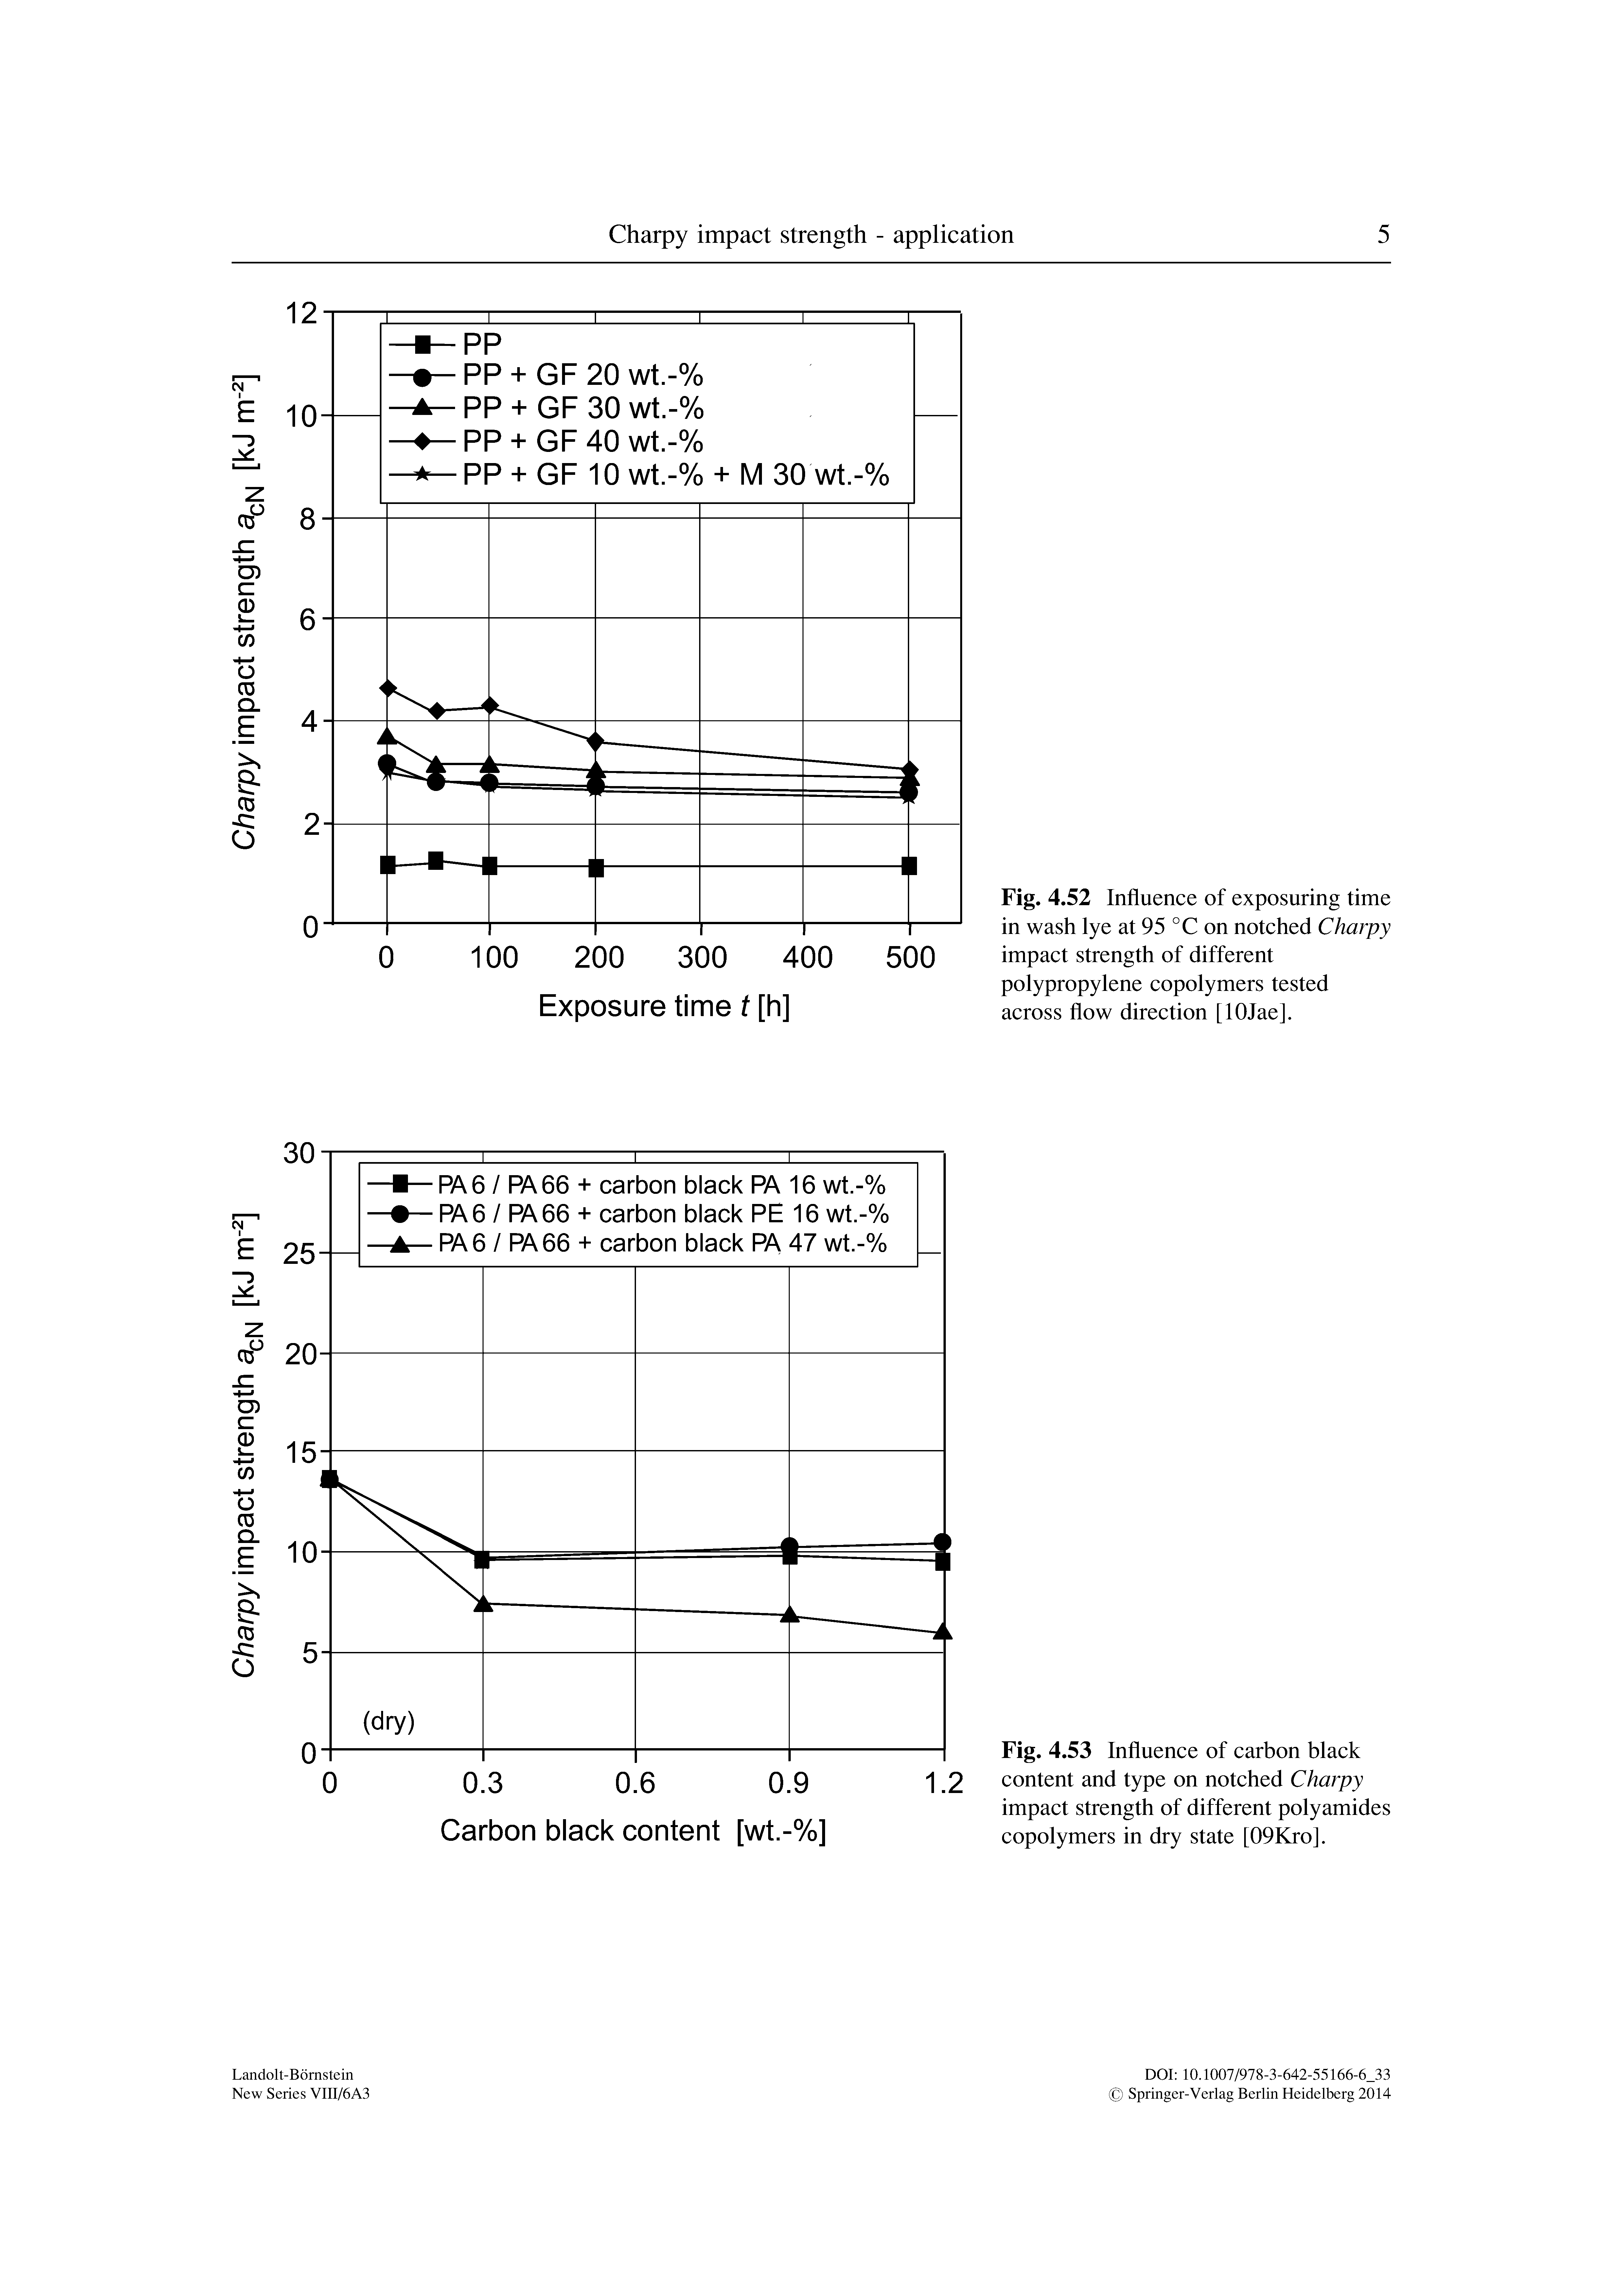 Fig. 4.53 Influence of carbon black content and type on notched Charpy impact strength of different polyamides copolymers in dry state [09Kro].